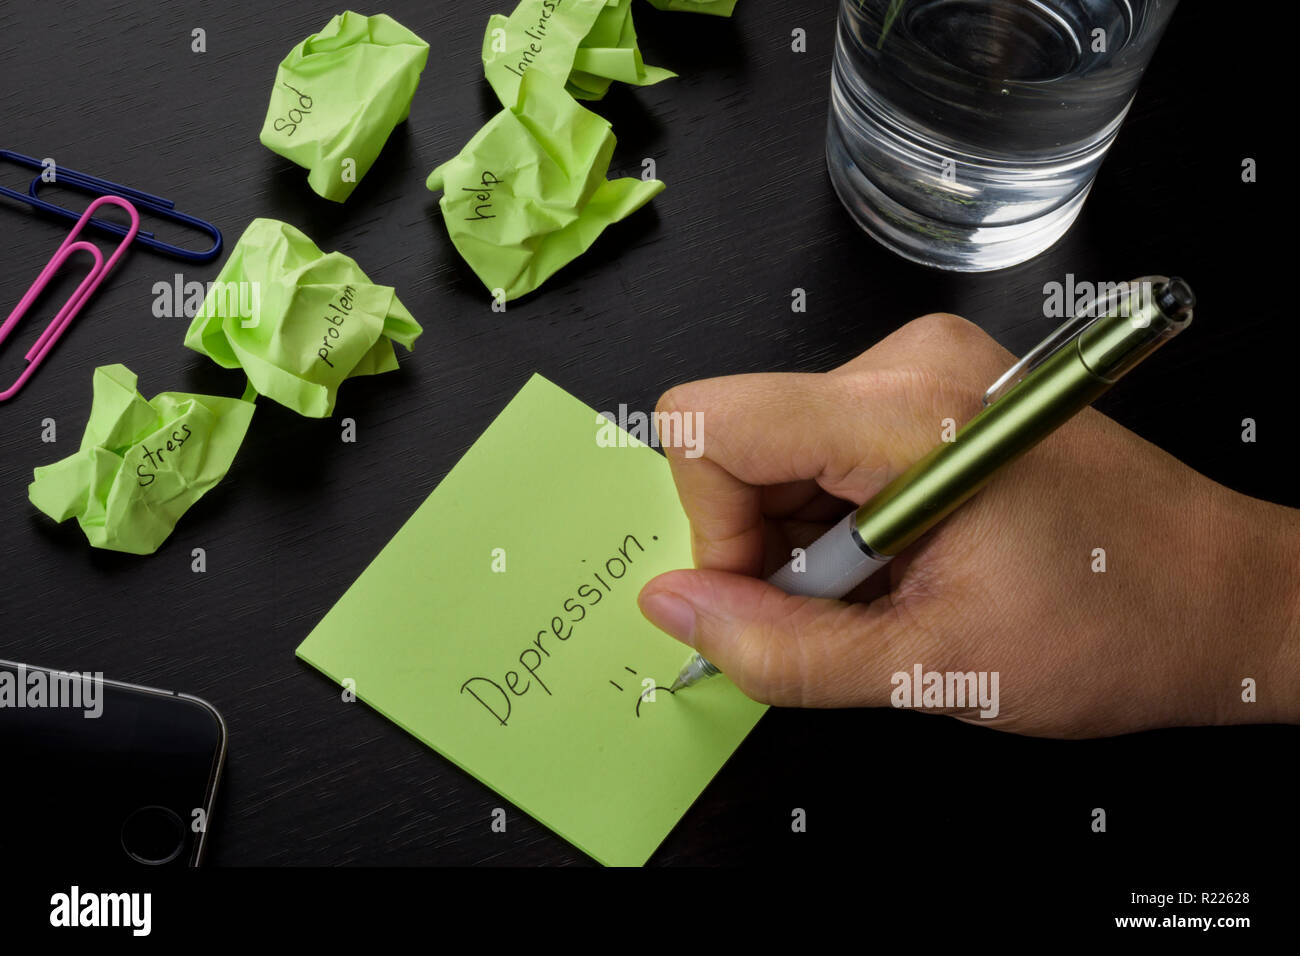 A hand writing on a green sticky note the word 'depression.' A photo about depression, sadness and loneliness. Crumpled green sticky notes scattered. Stock Photo